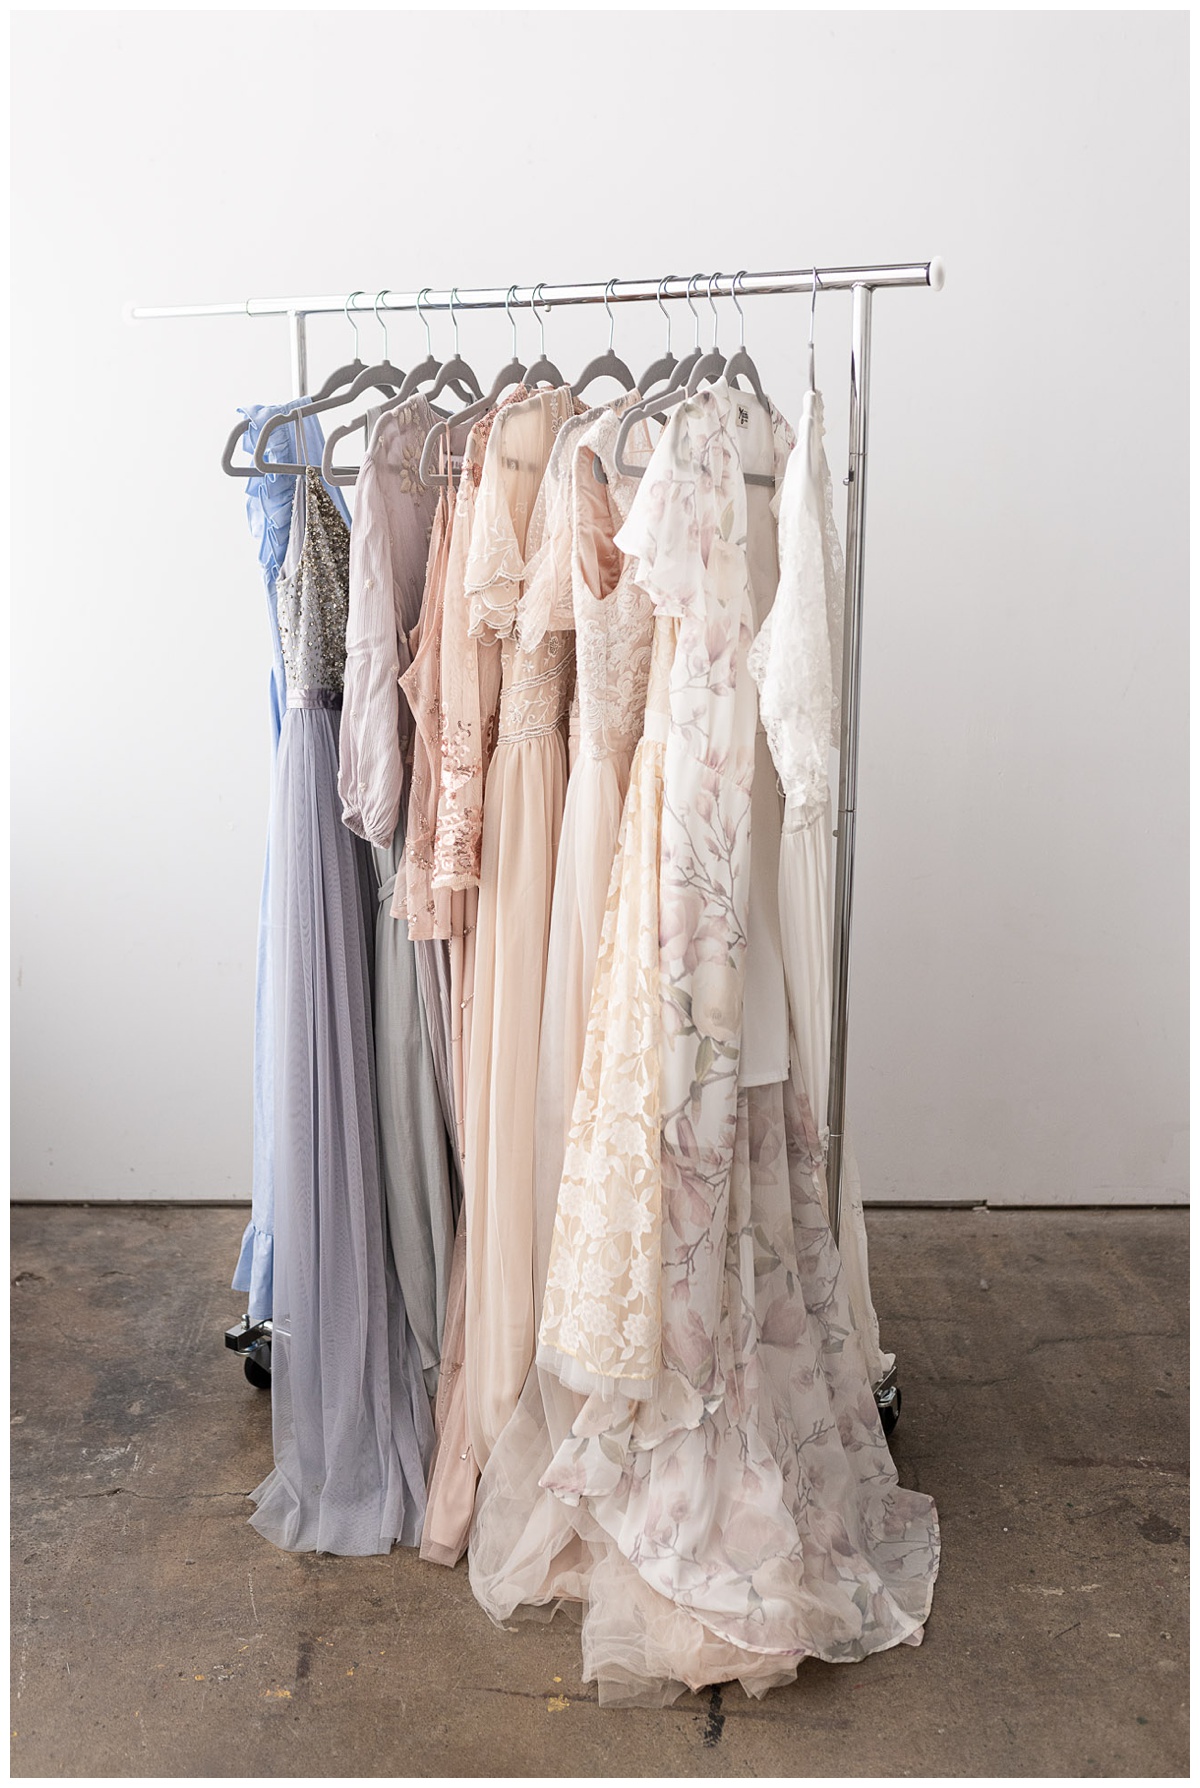 examples of the luxury photographer experience including luxury gowns in a studio wardrobe